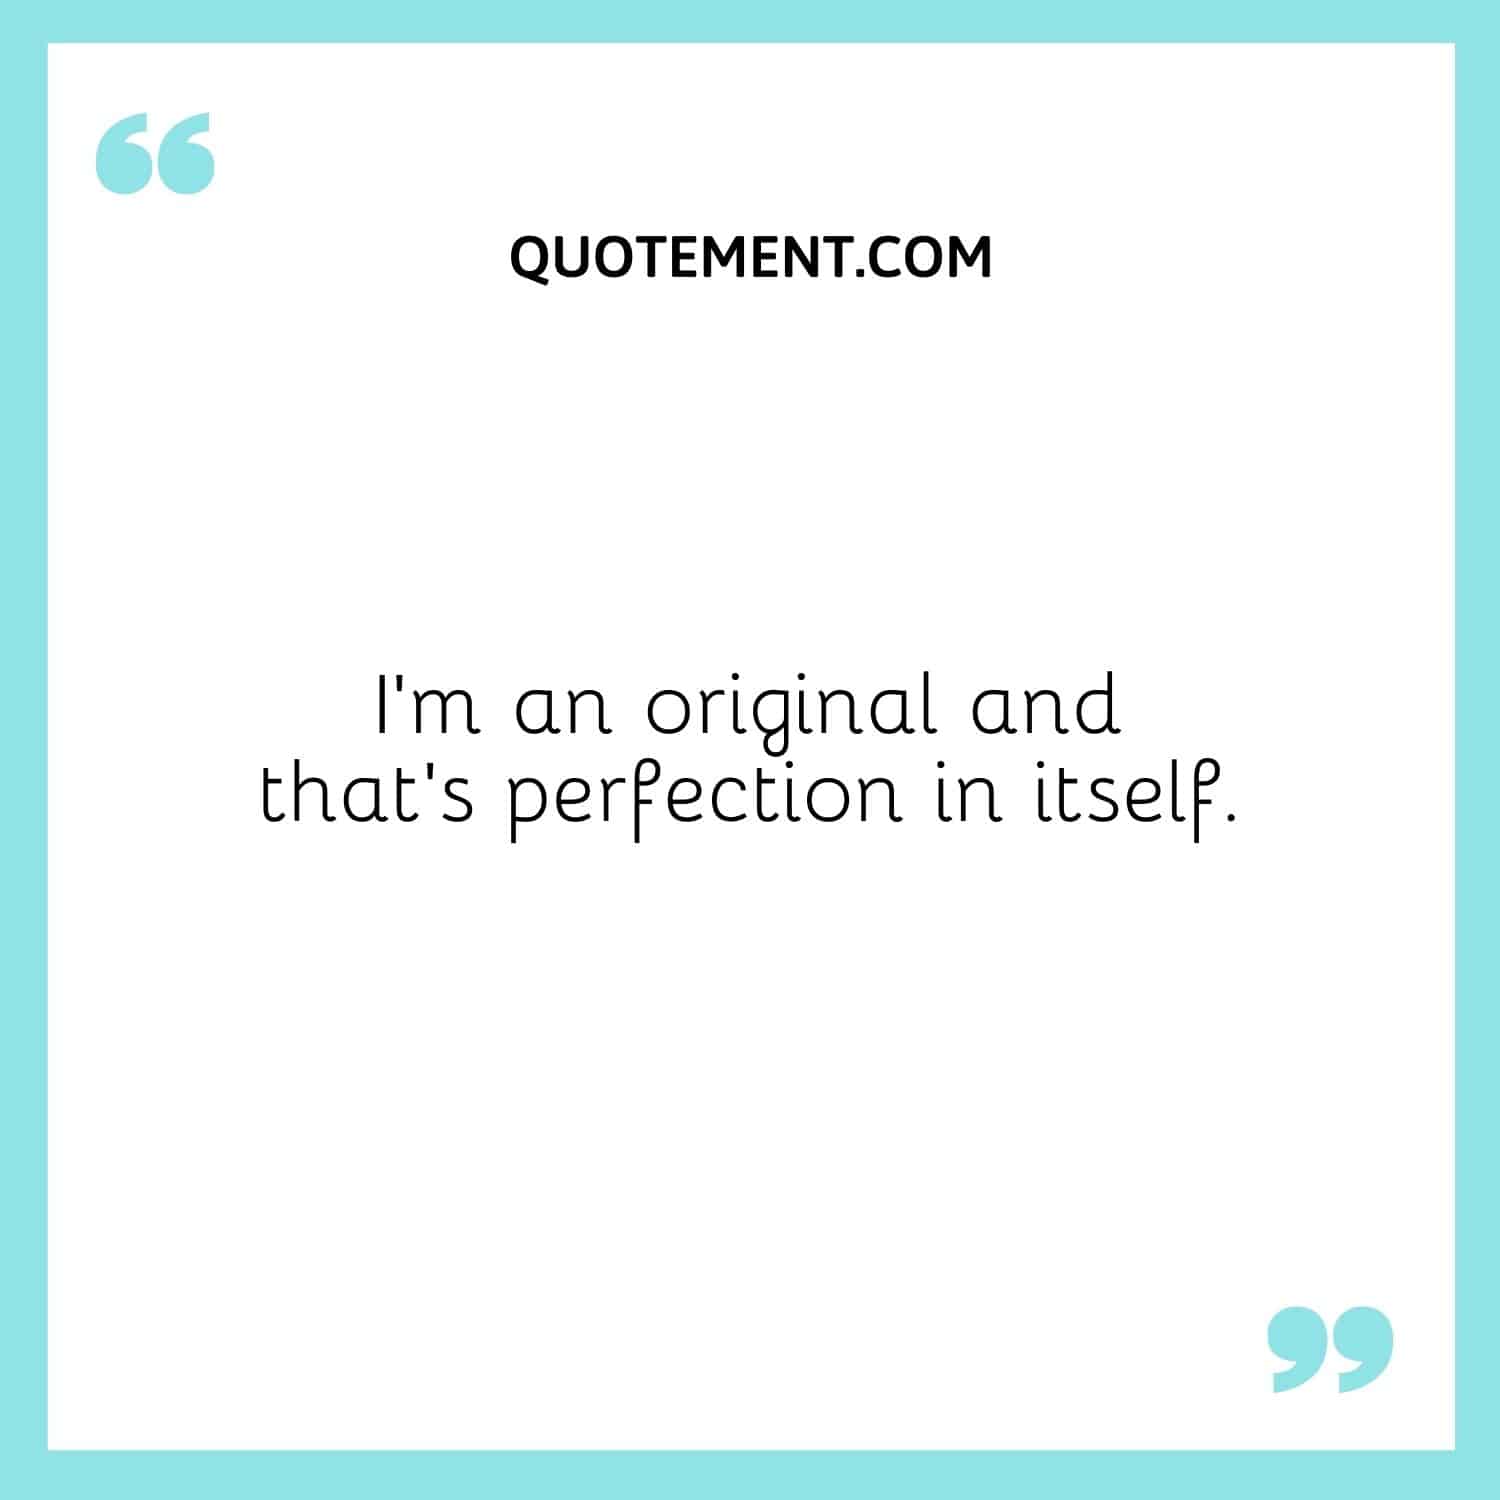 I'm an original and that's perfection in itself.